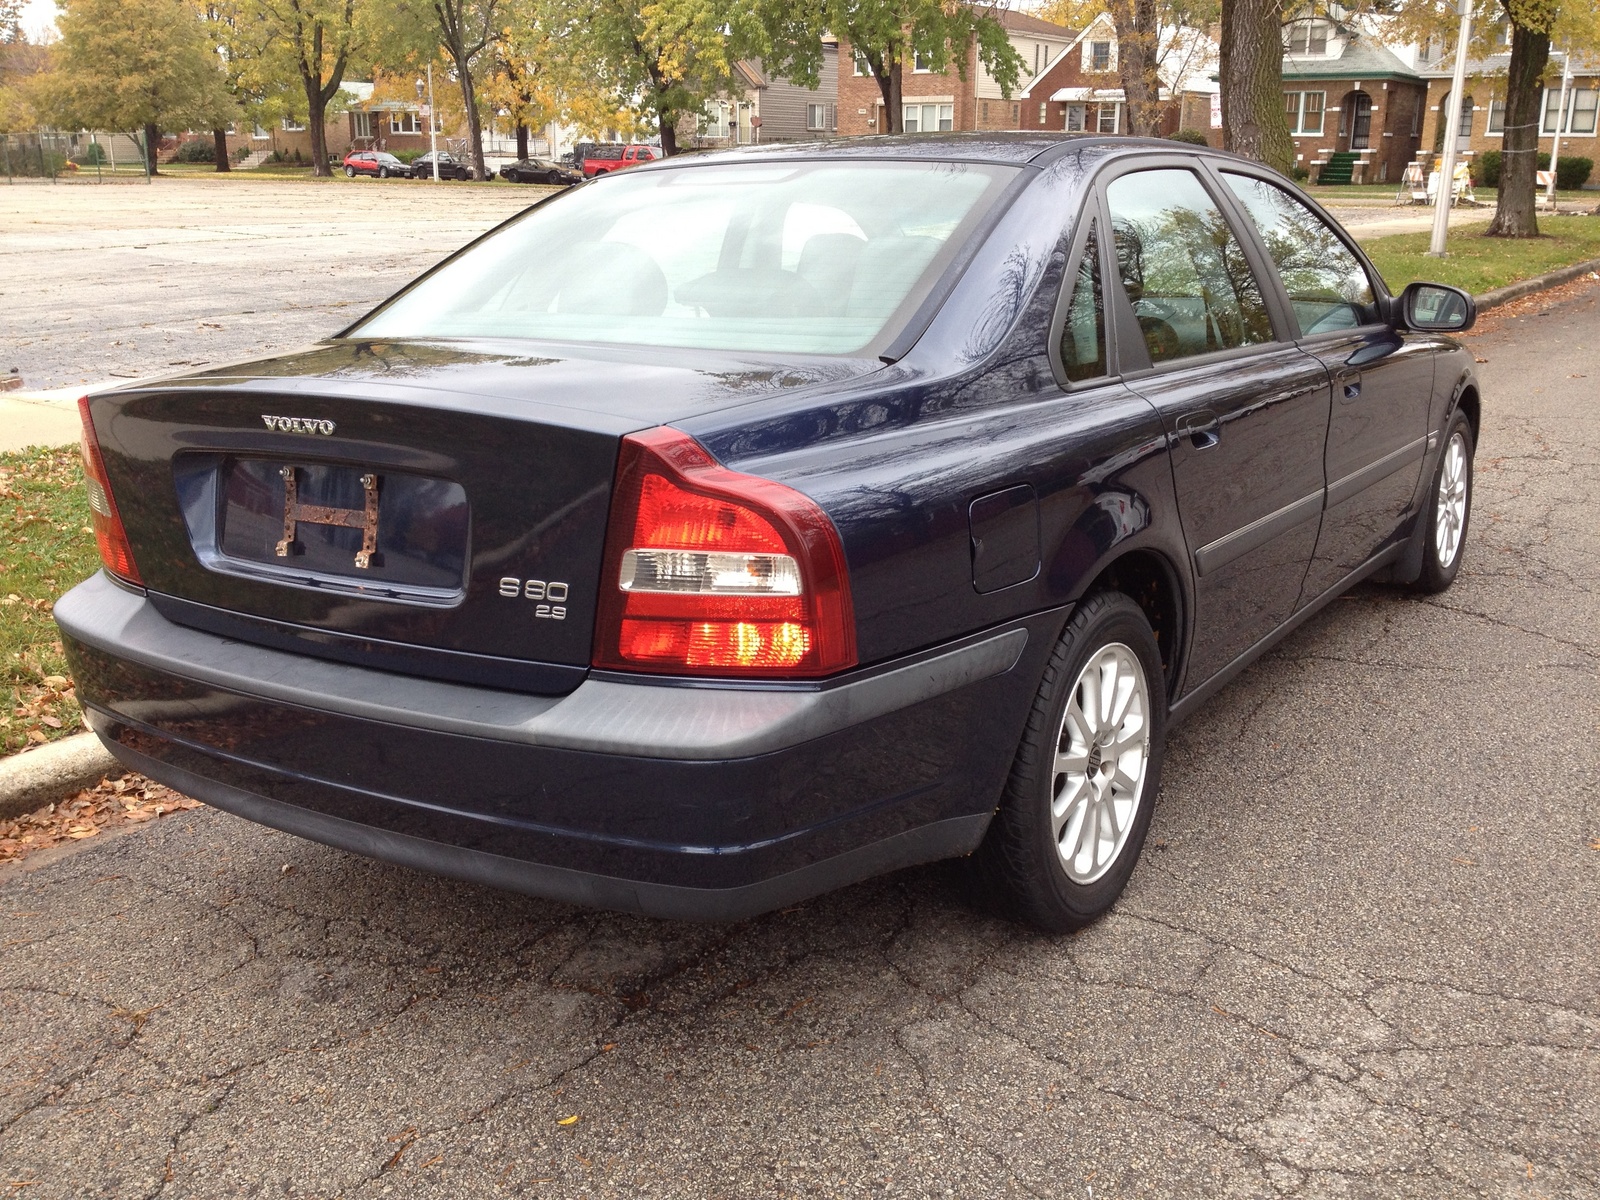 2001 Volvo S80 Overview. 2001 Volvo S80. The Volvo S80 returns for its third